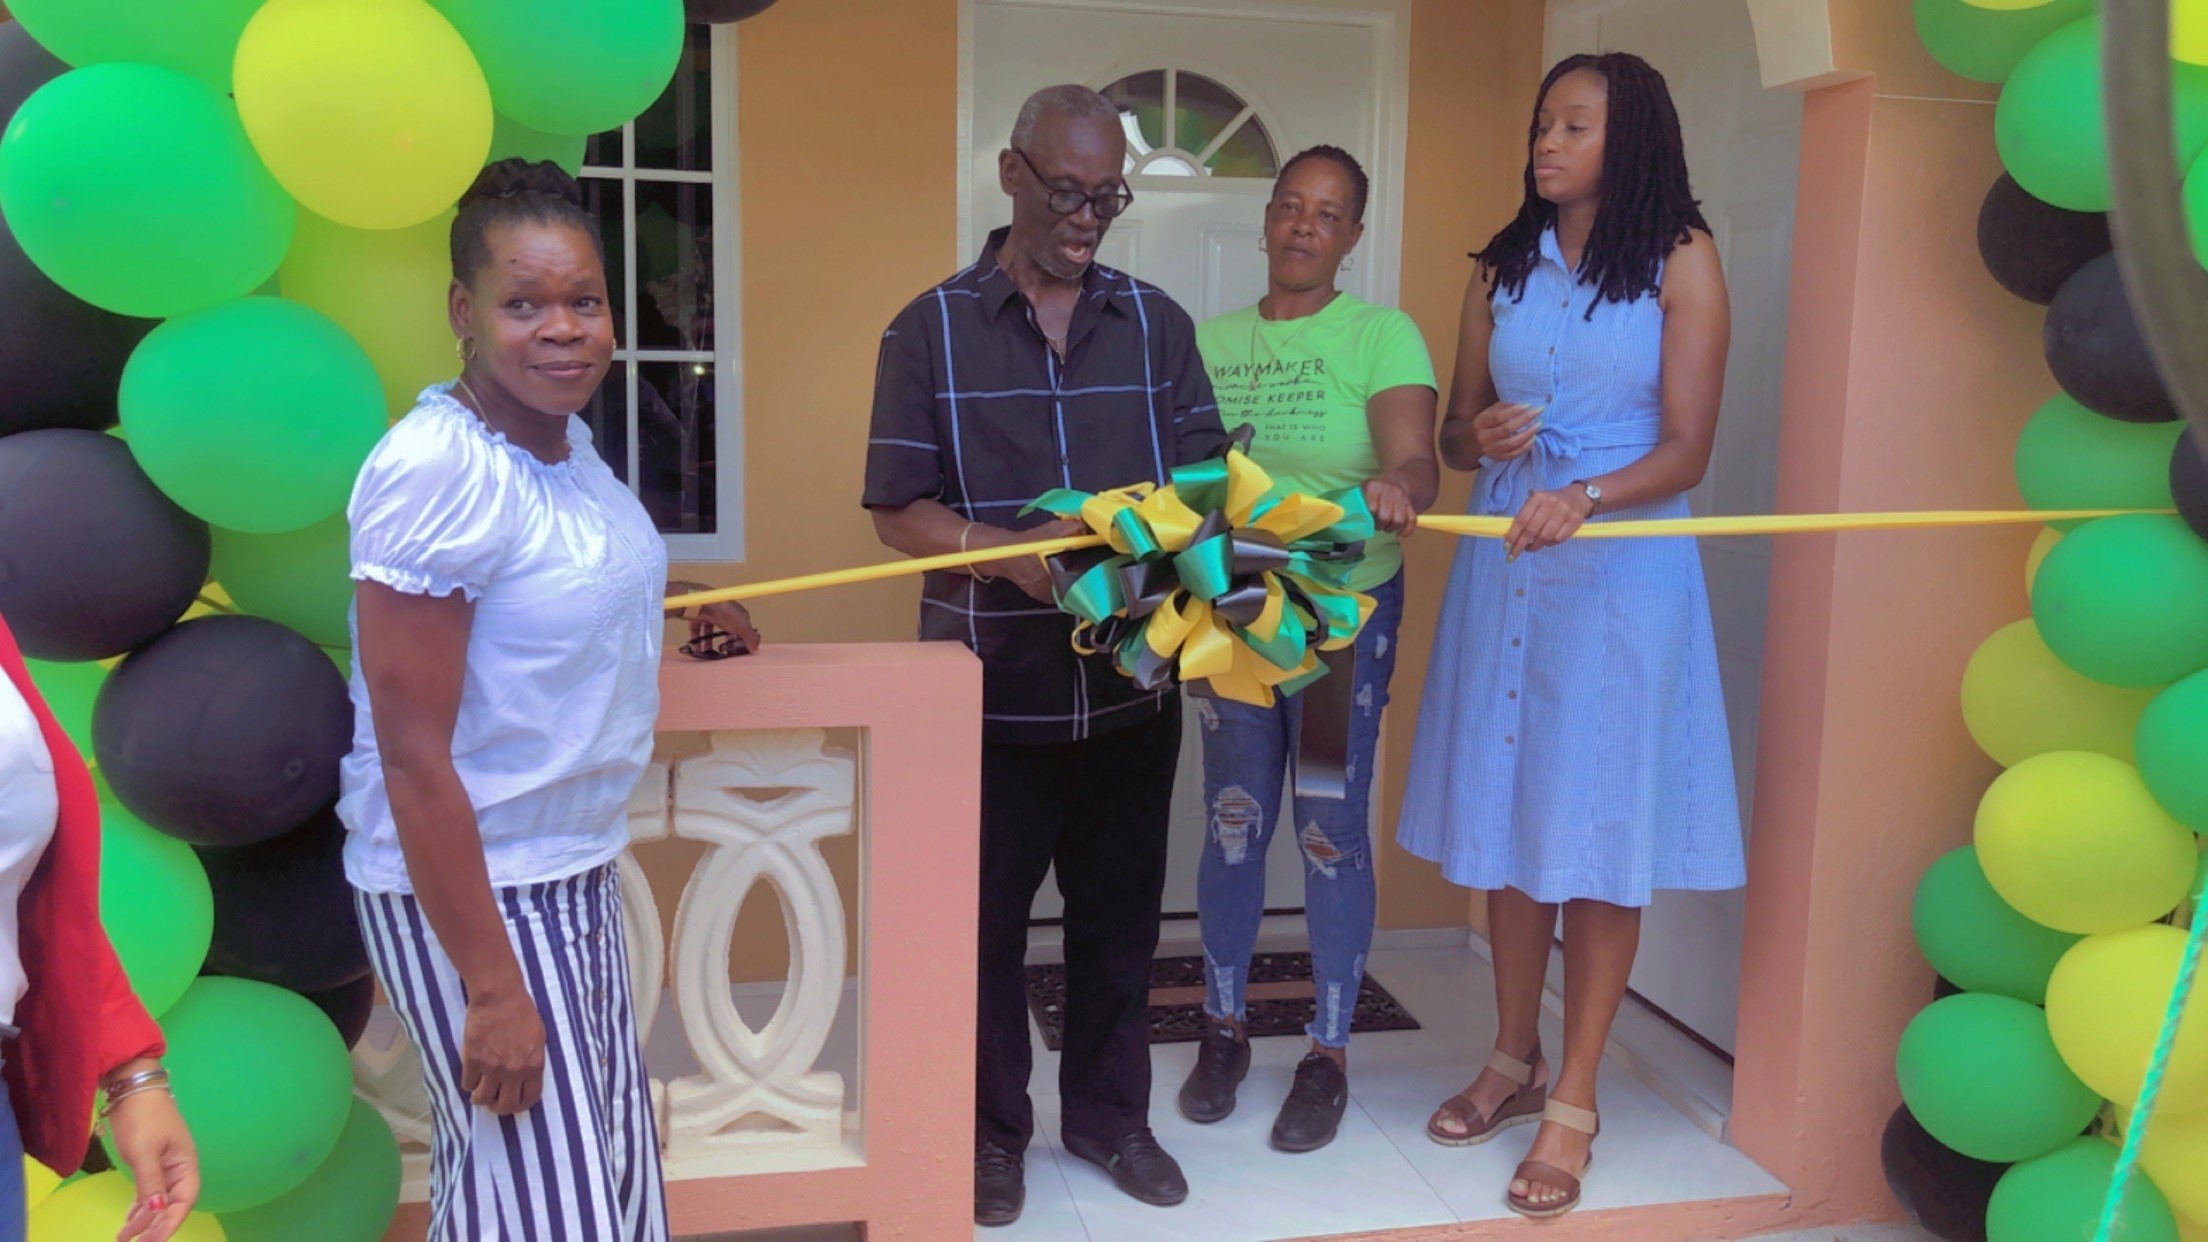 Two Indigent Houses handed over in Manchester